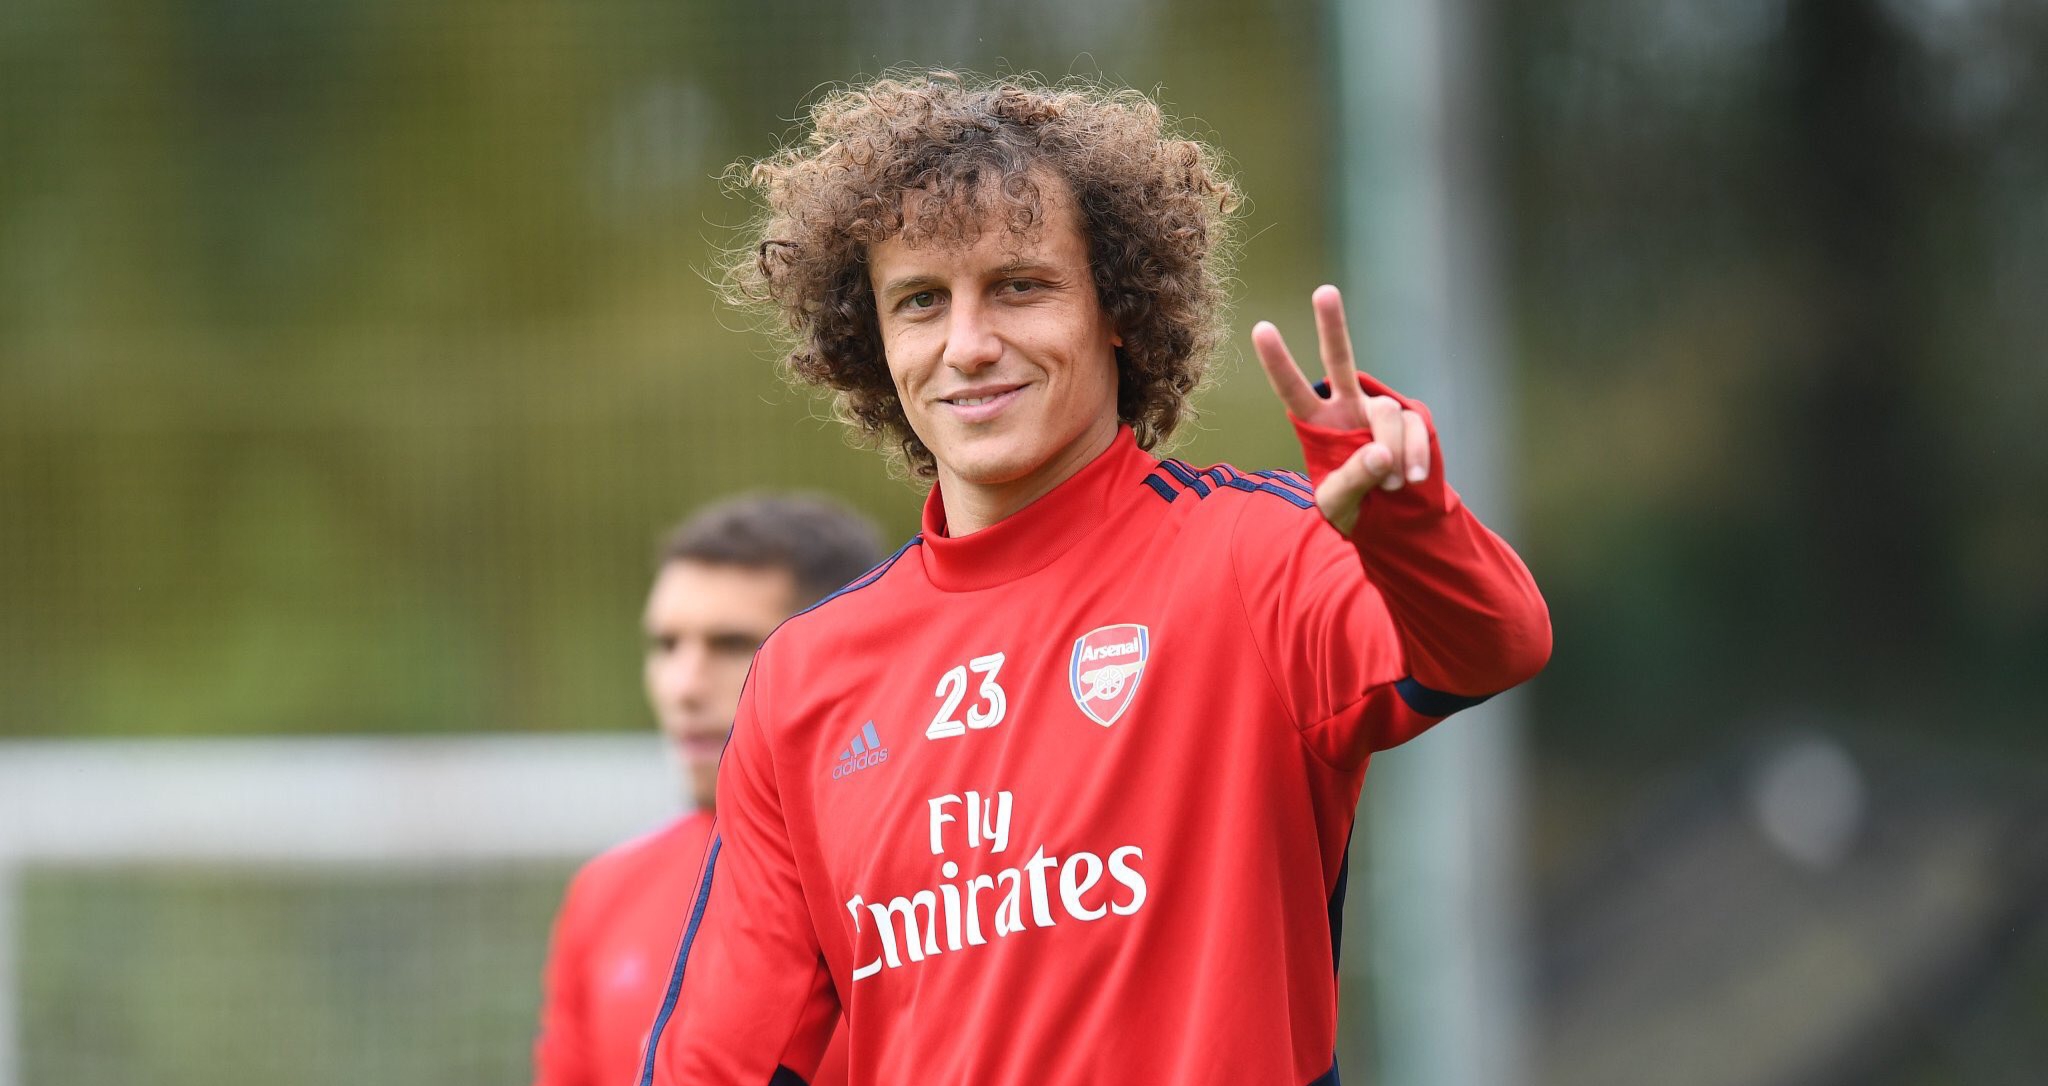 David Luiz reveals how Chelsea staff reacted to his surprise move to Arsenal